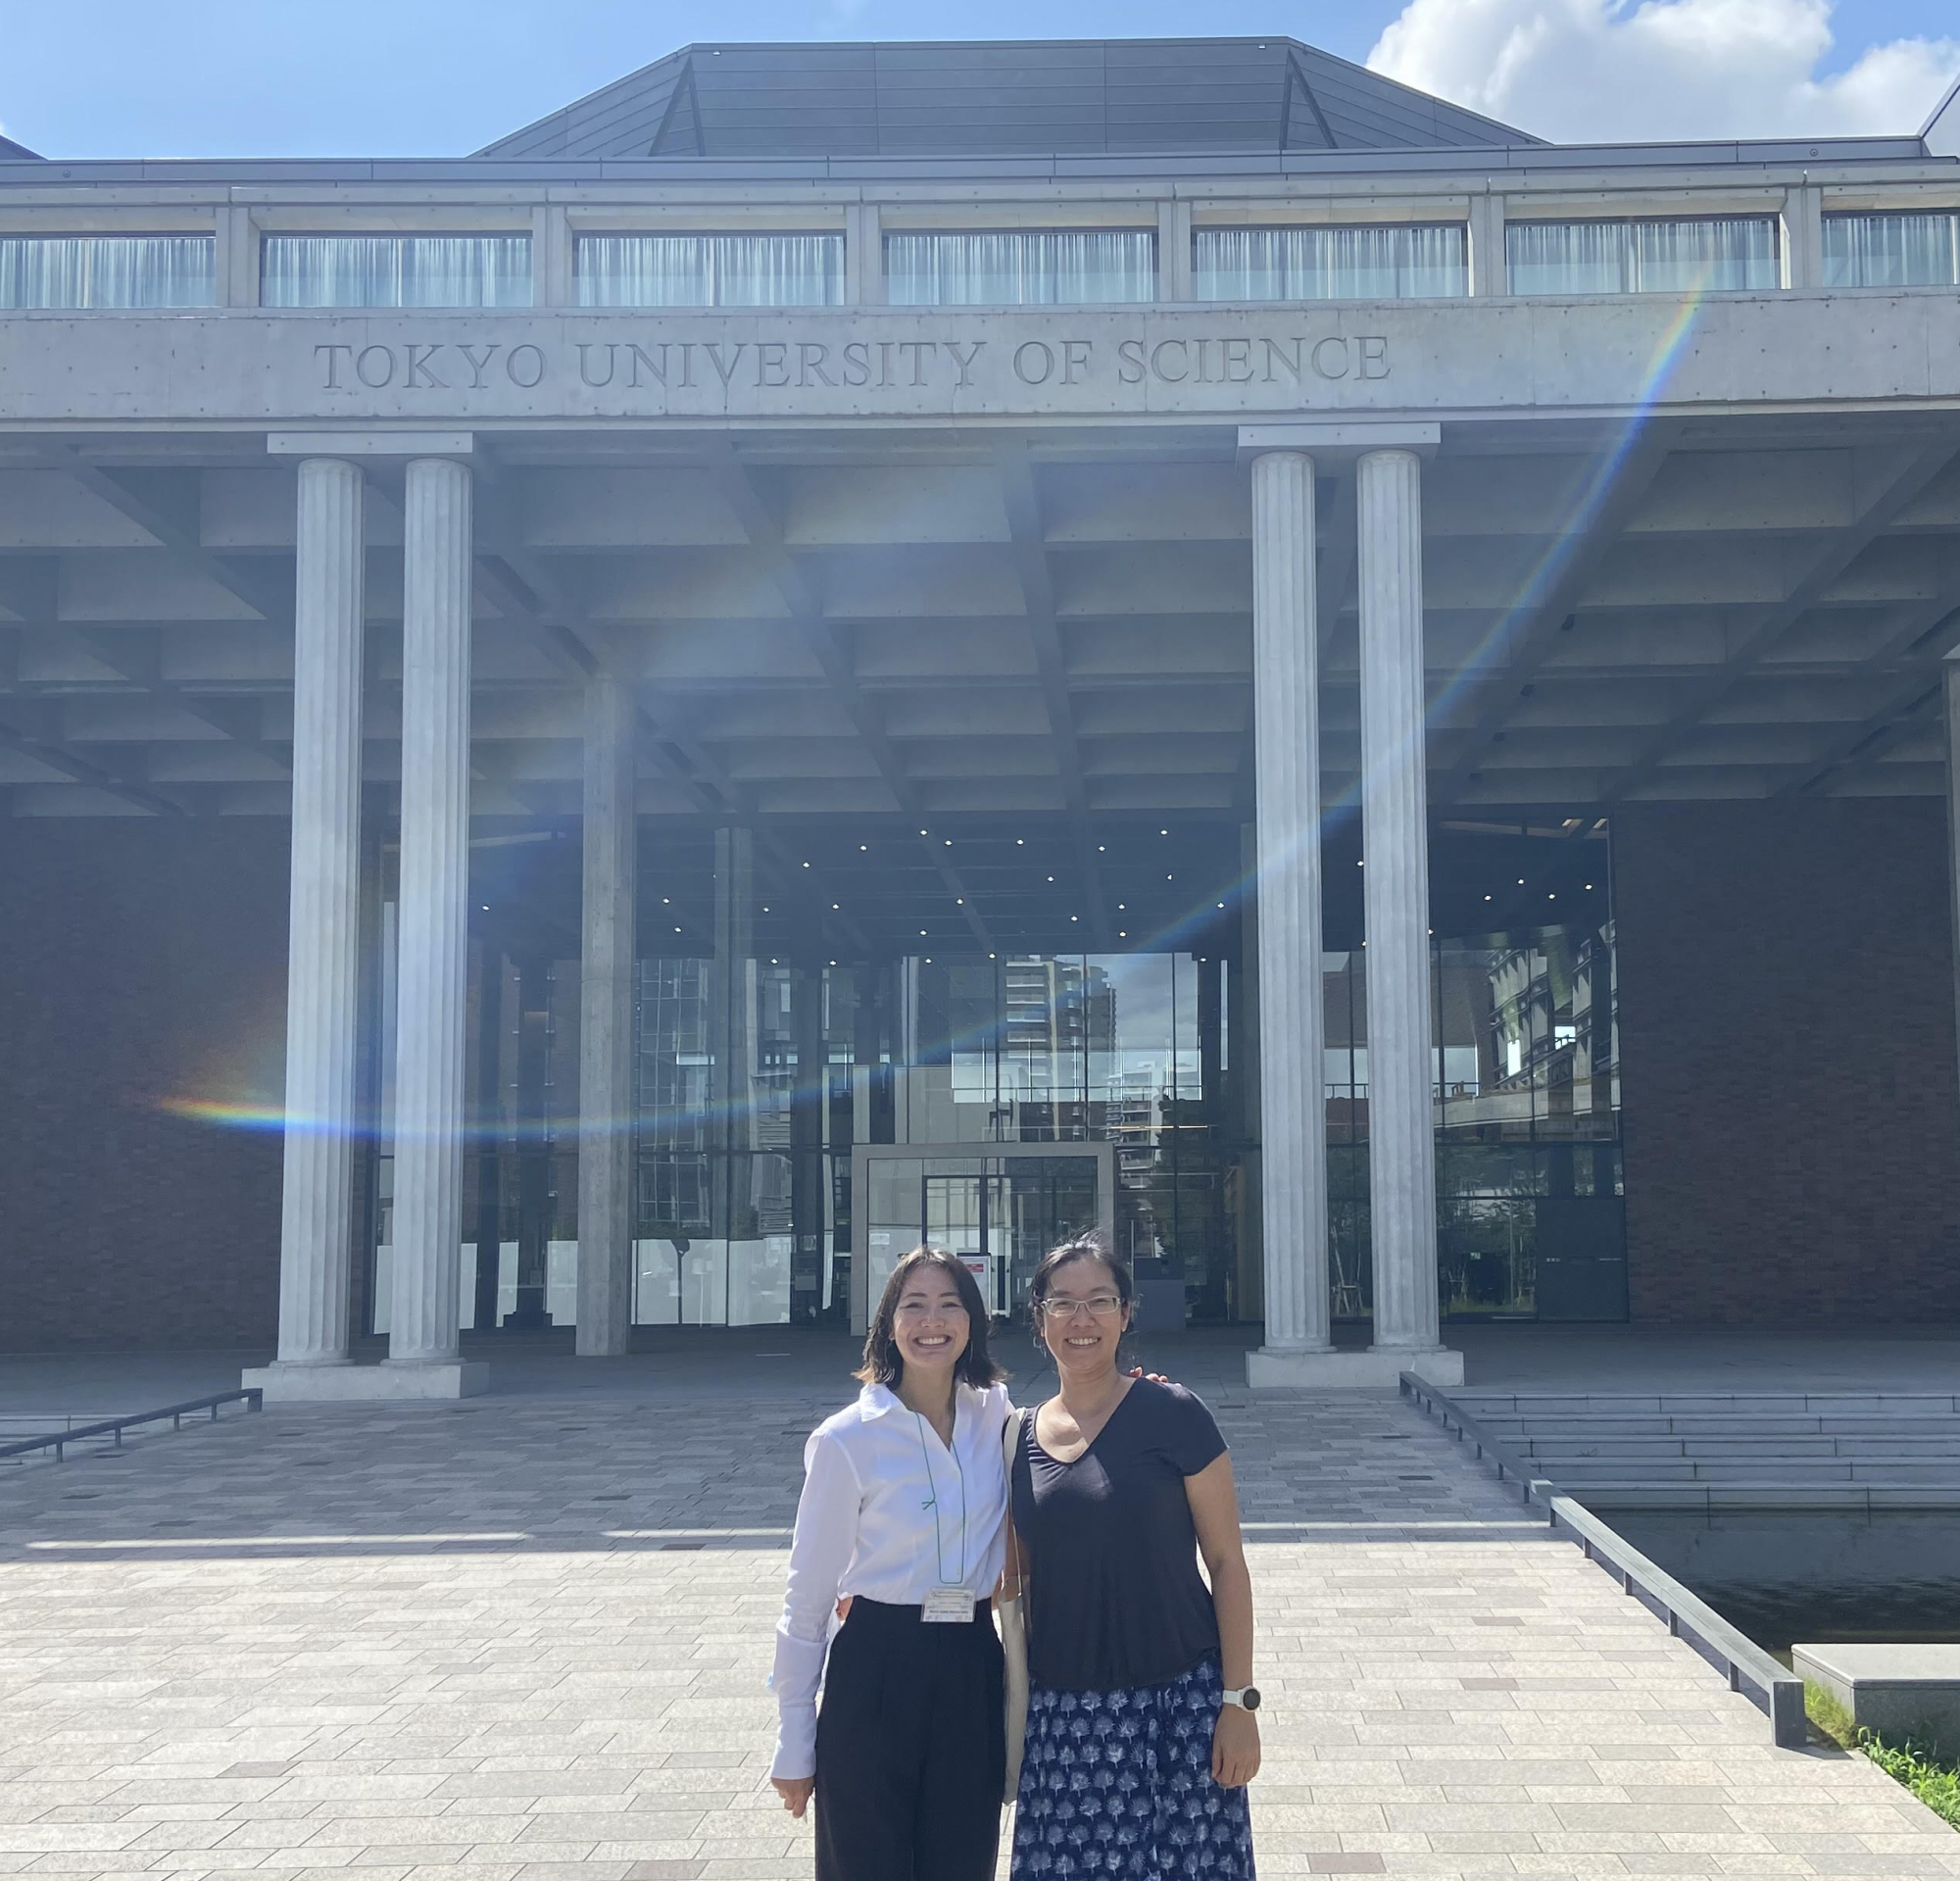 Kylee Seto '23 and Dr. Chen